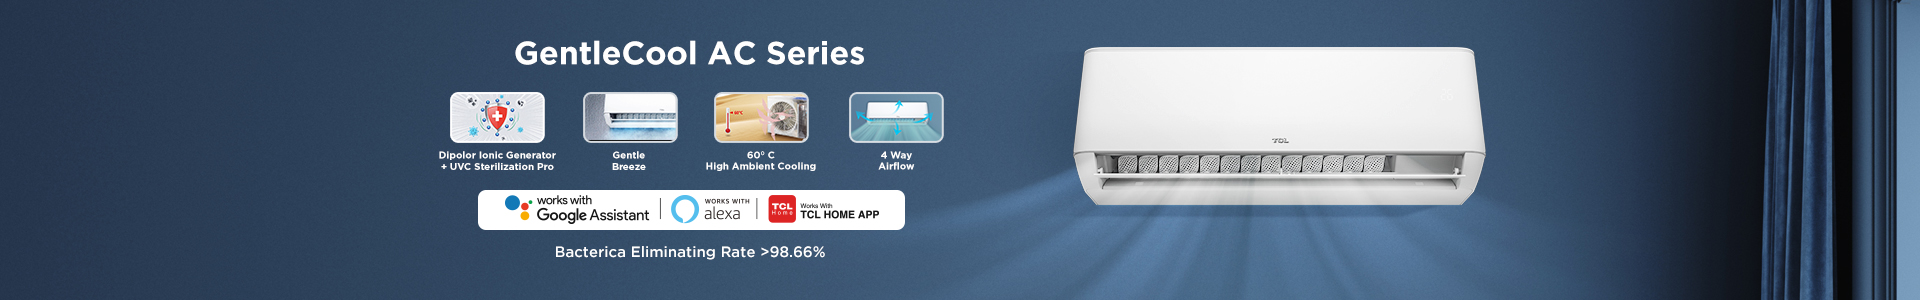 TCL - Buy ultra-inverter air conditioner online